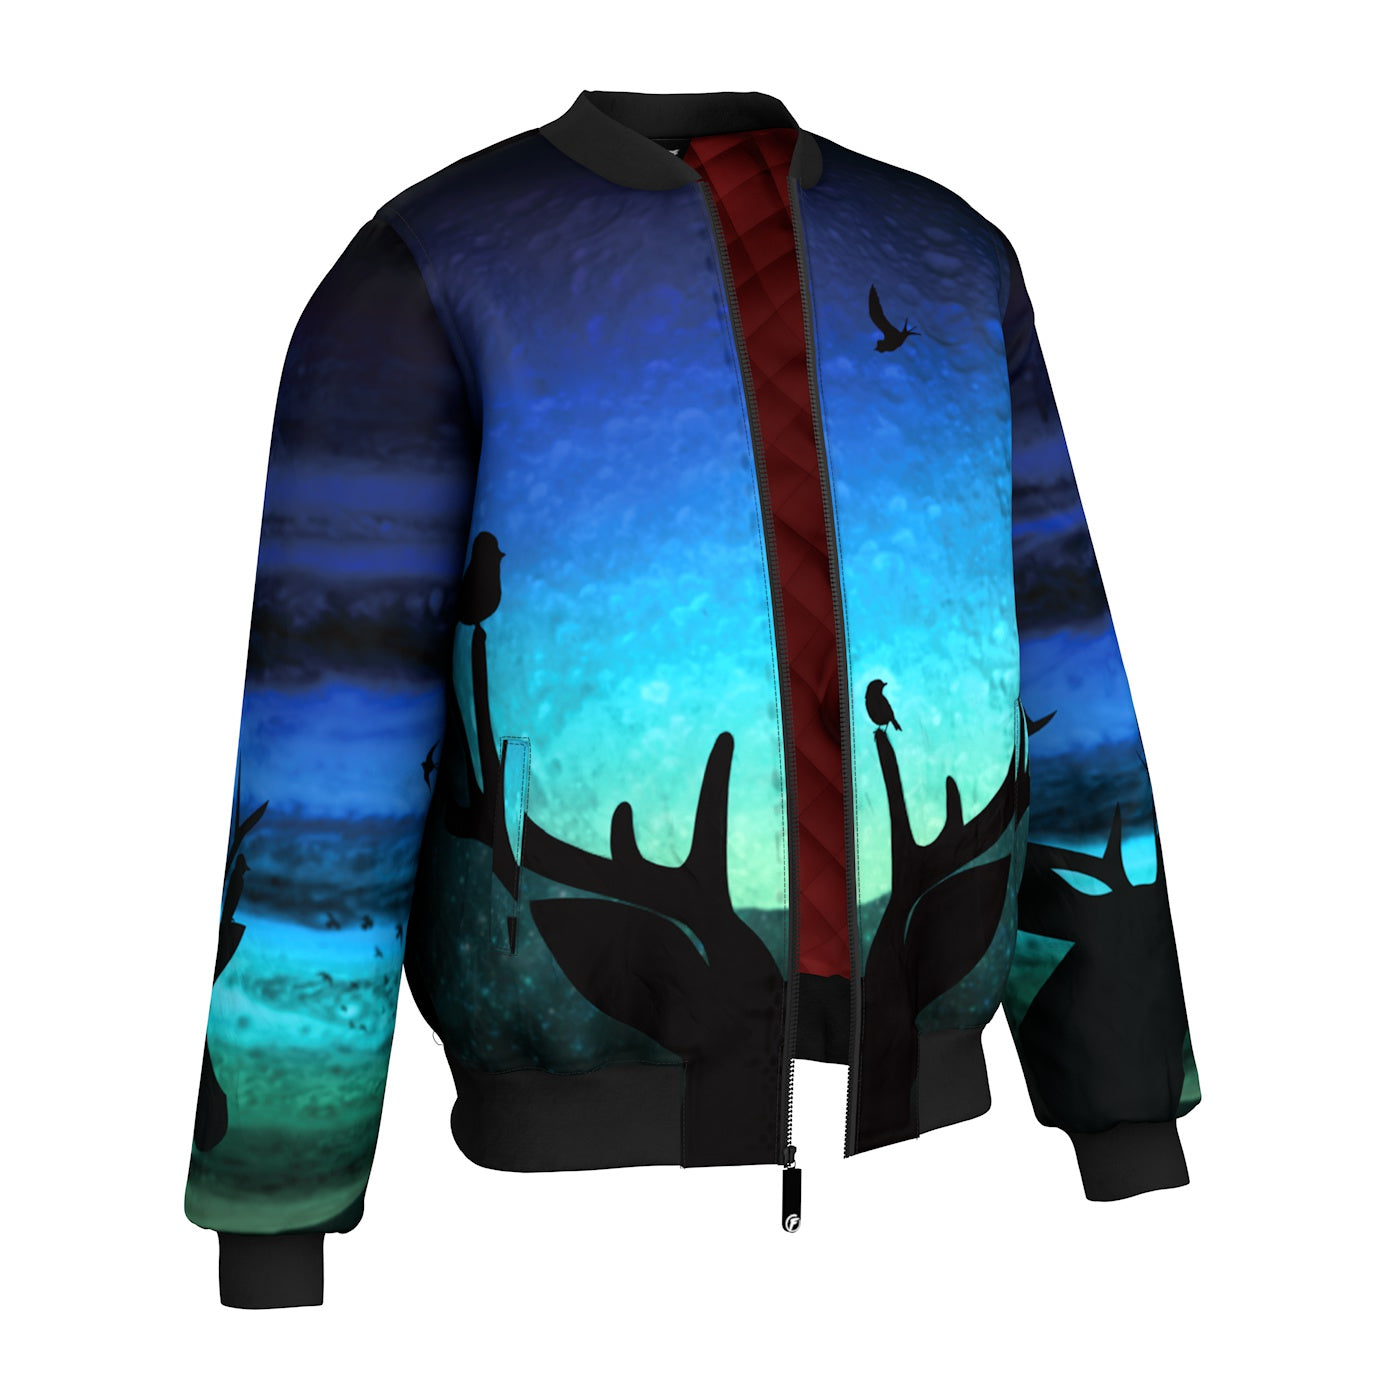 Magical Moment Bomber Jacket